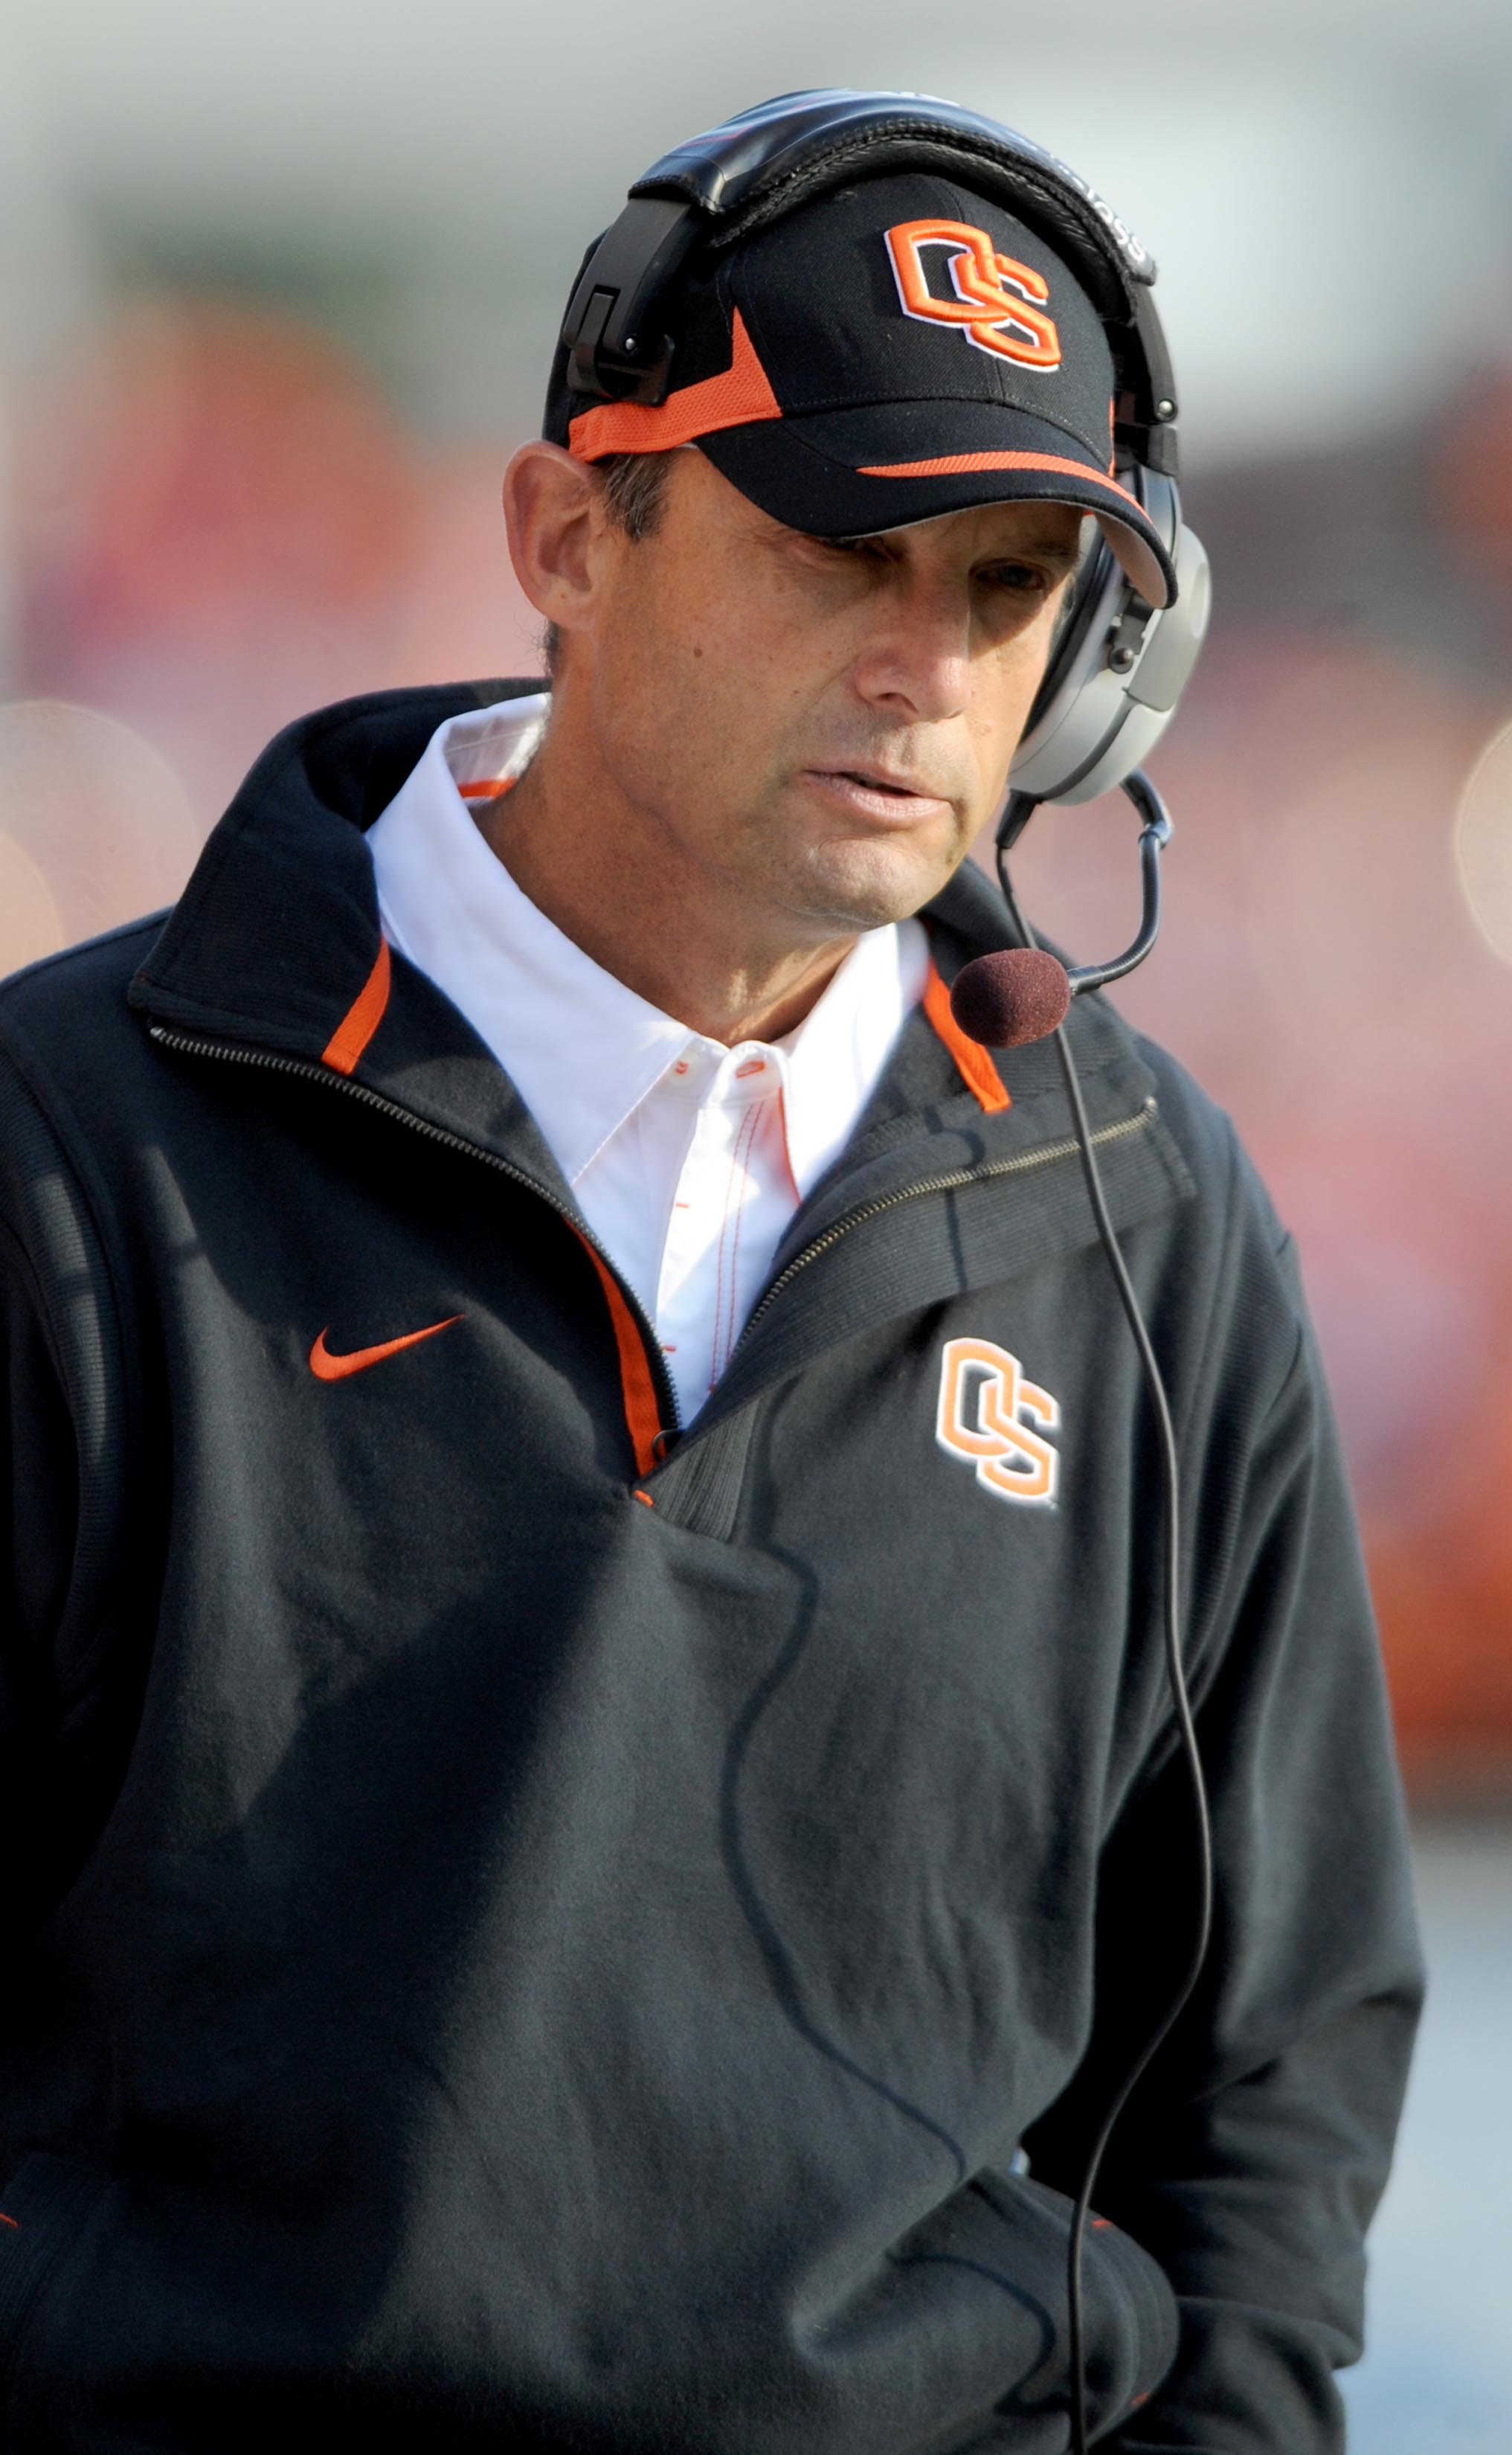 CORVALLIS, OR - OCTOBER 10: Head coach Mike Riley of the Oregon State Beavers looks out at the action on the field in the third quarter of the game against the Stanford Cardinals at Reser Stadium on October 10, 2009 in Corvallis, Oregon. Oregon State won